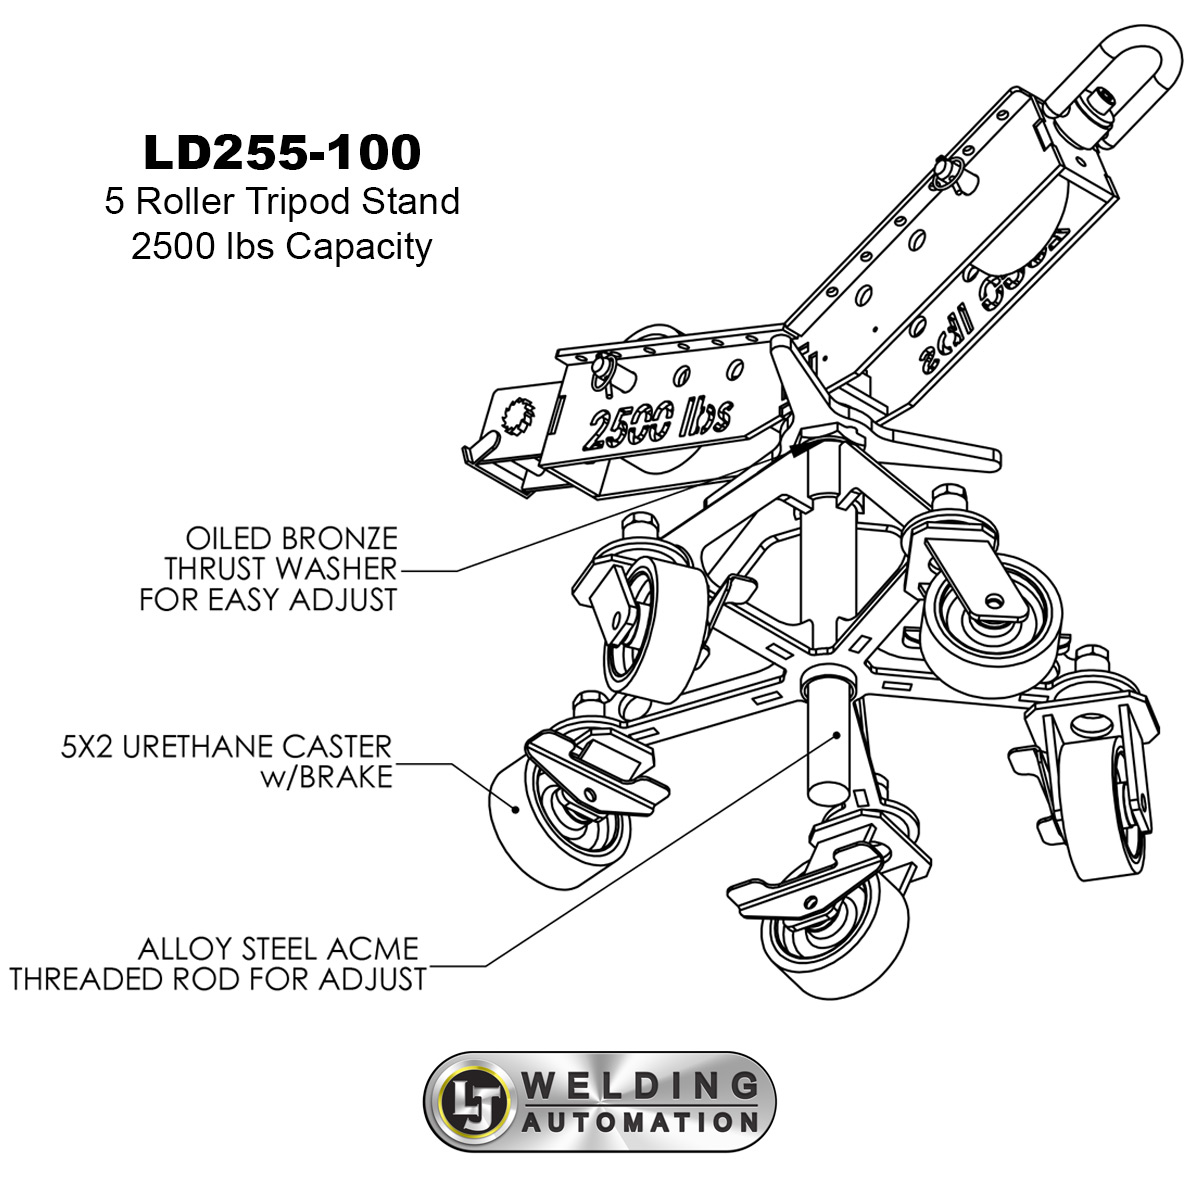 LD255-100 industrial pipe stand